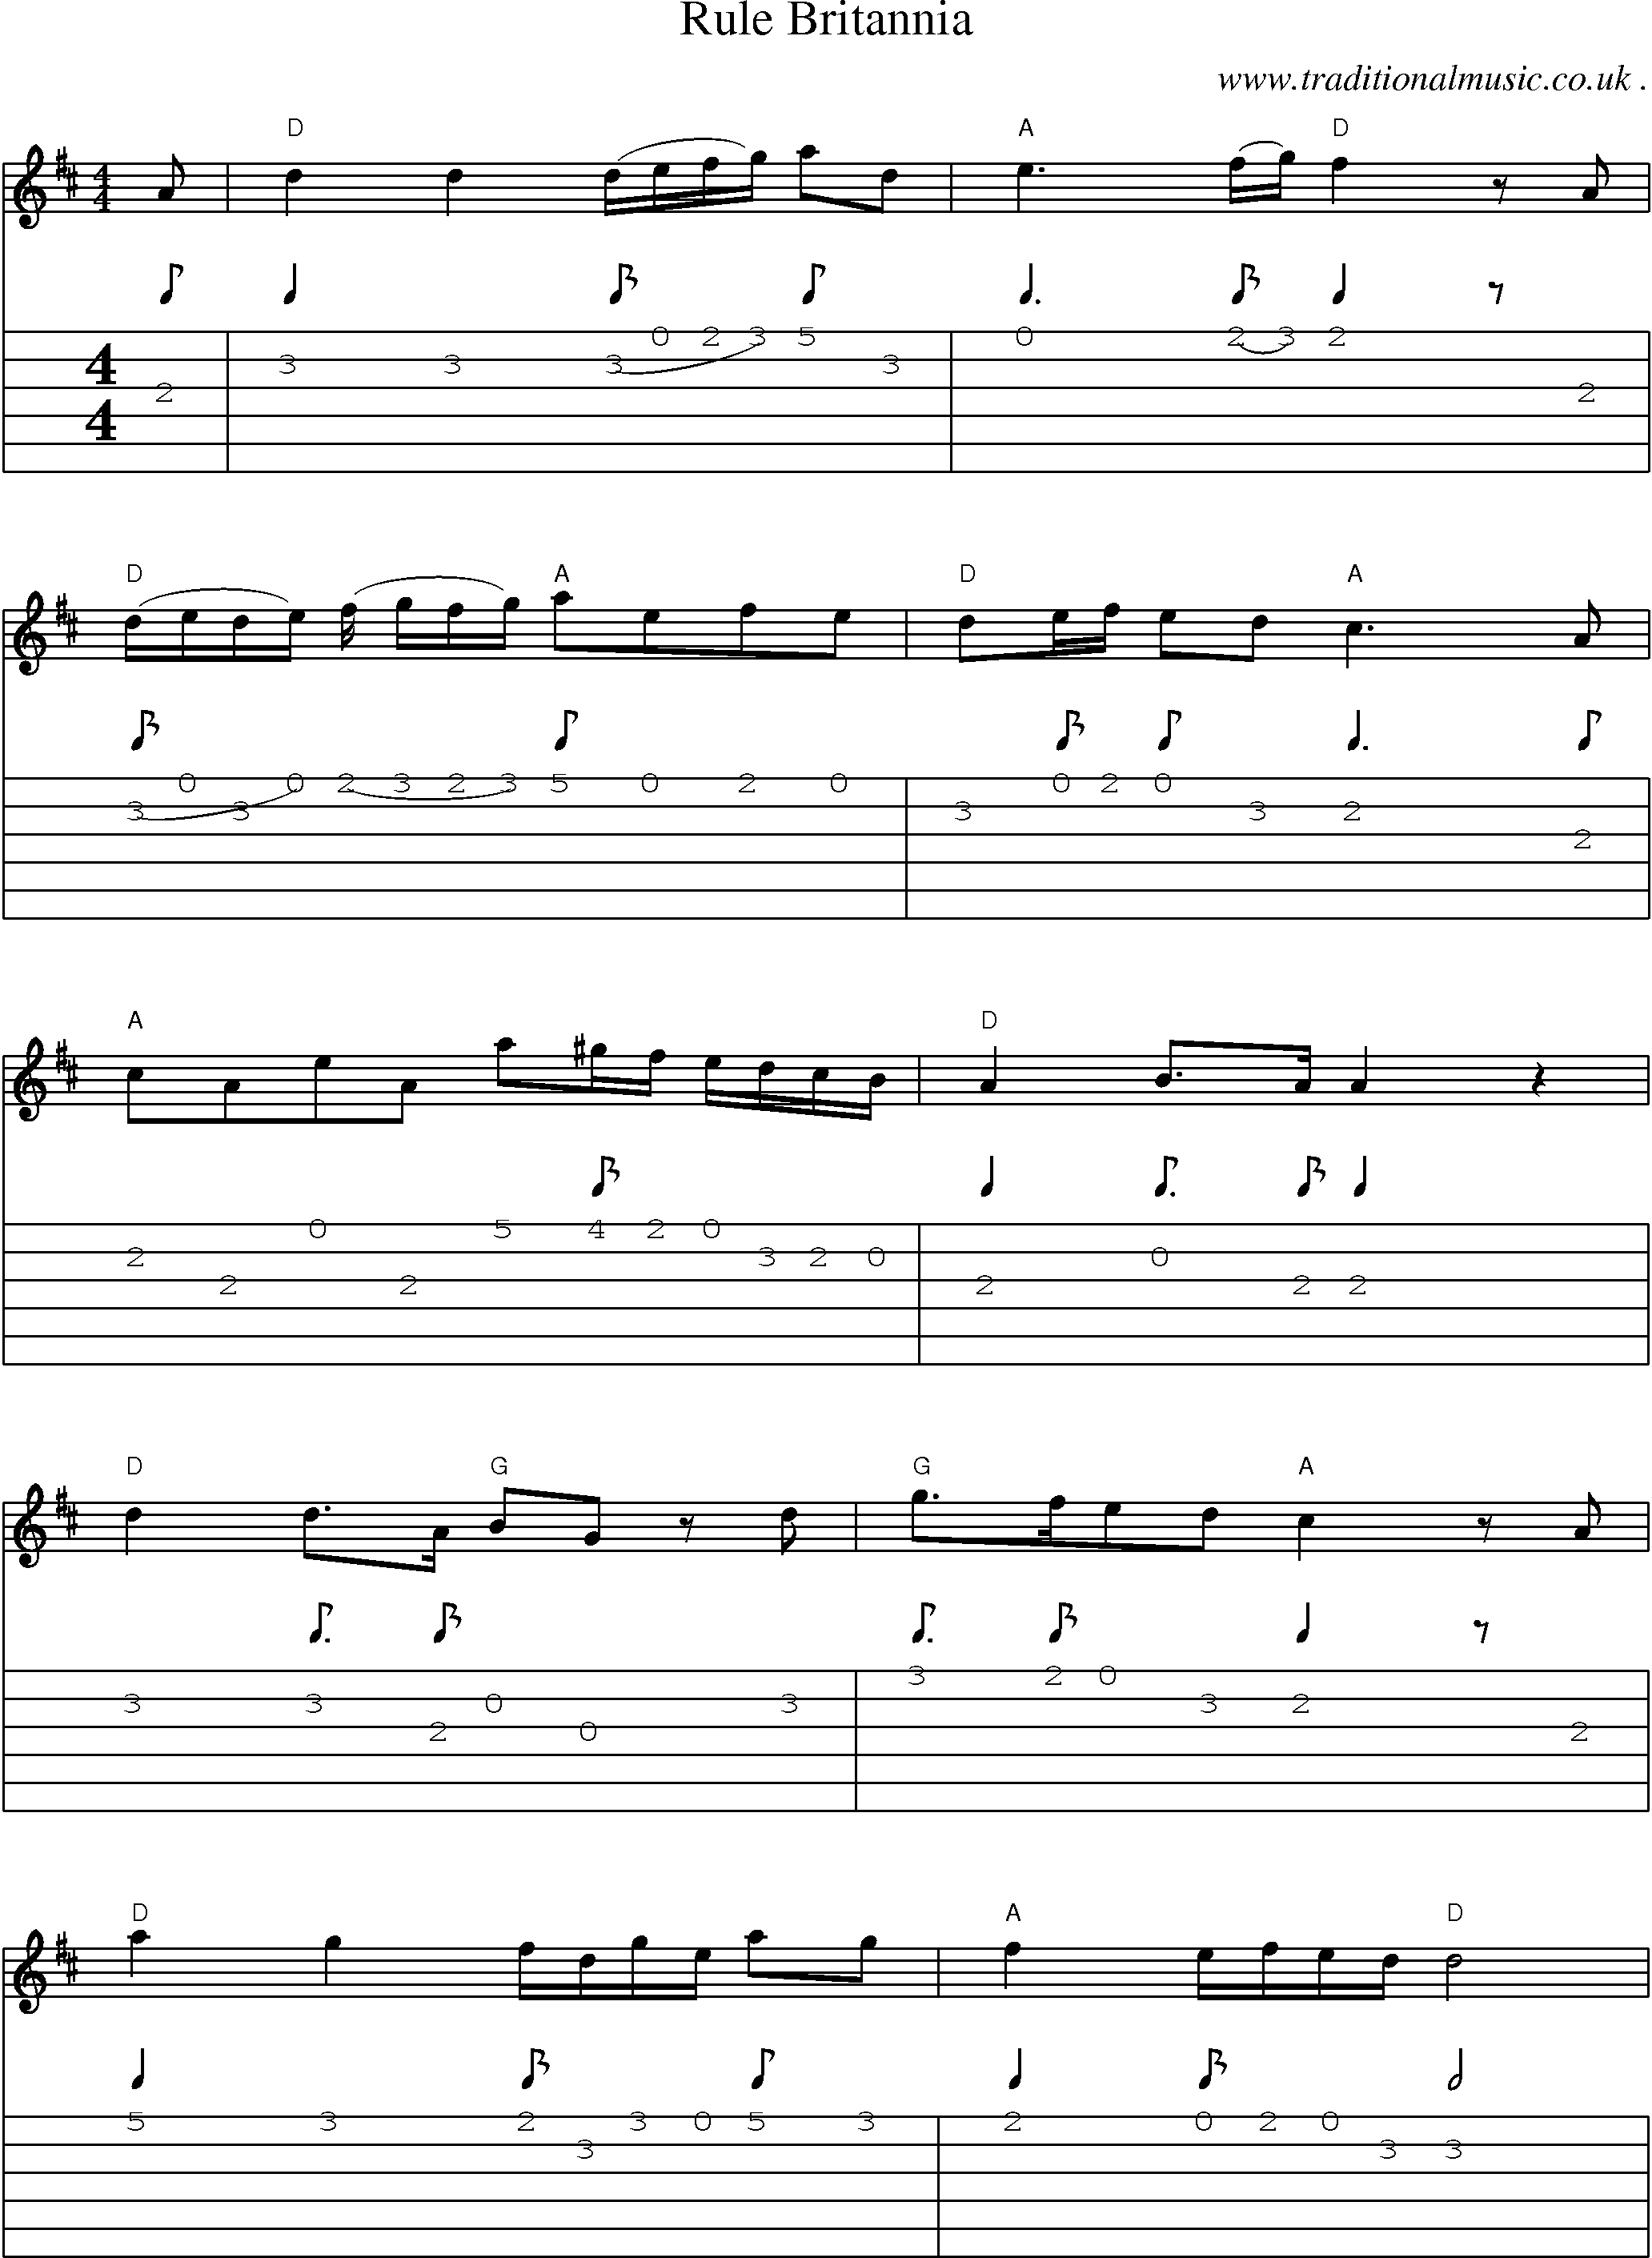 Music Score and Guitar Tabs for Rule Britannia